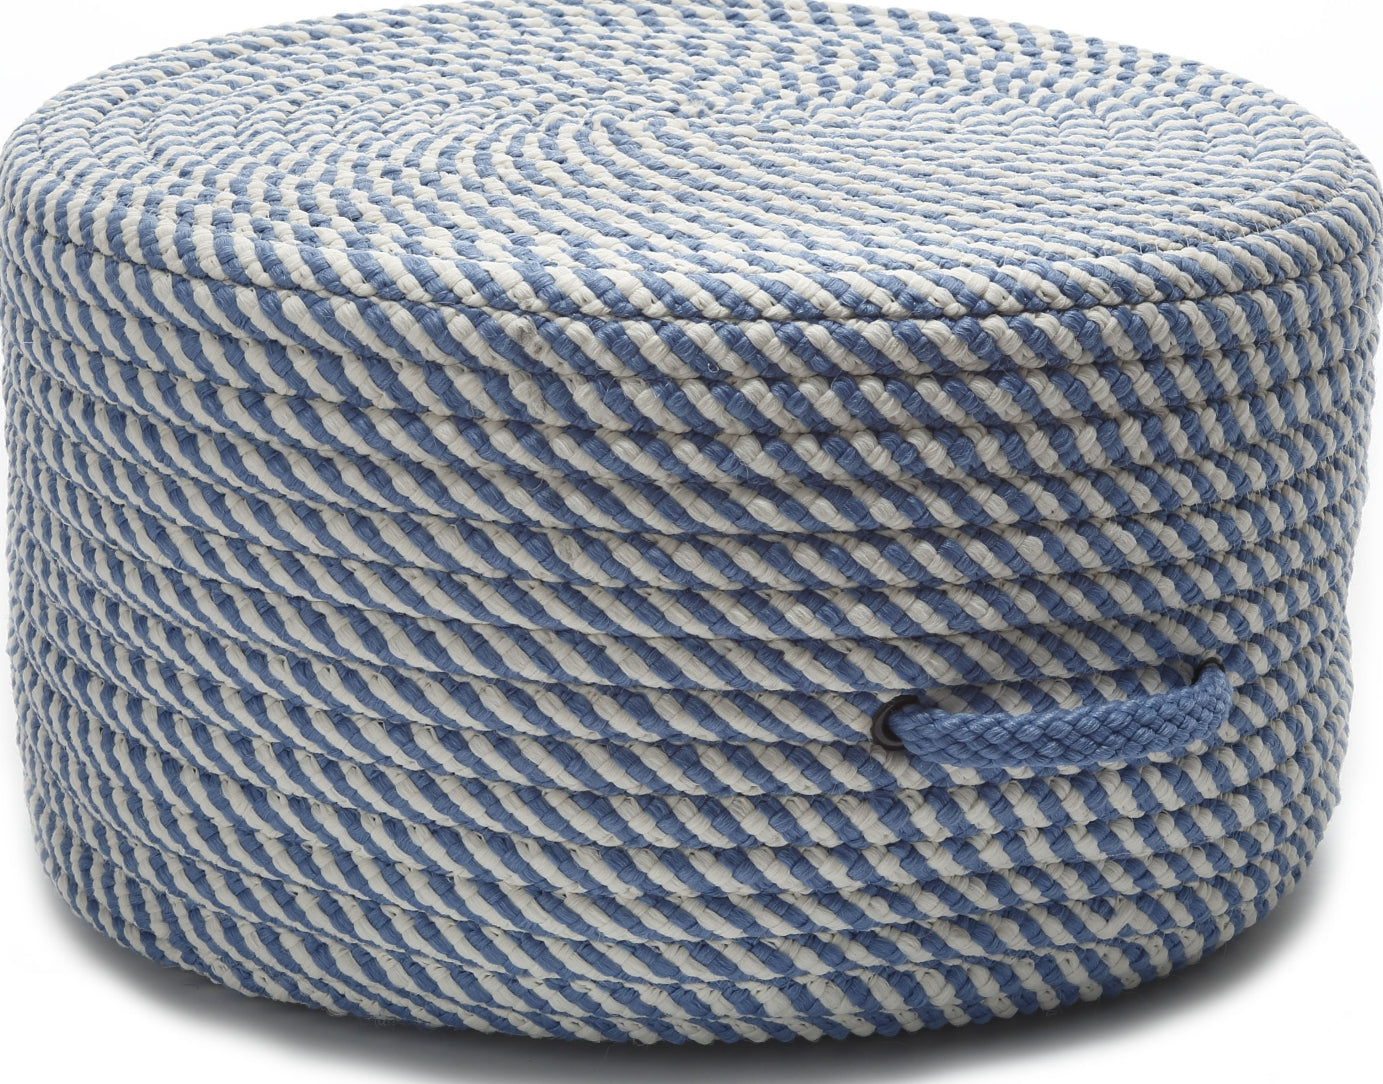 Colonial Mills Bright Twist Pouf UF51 Blue Ice and White